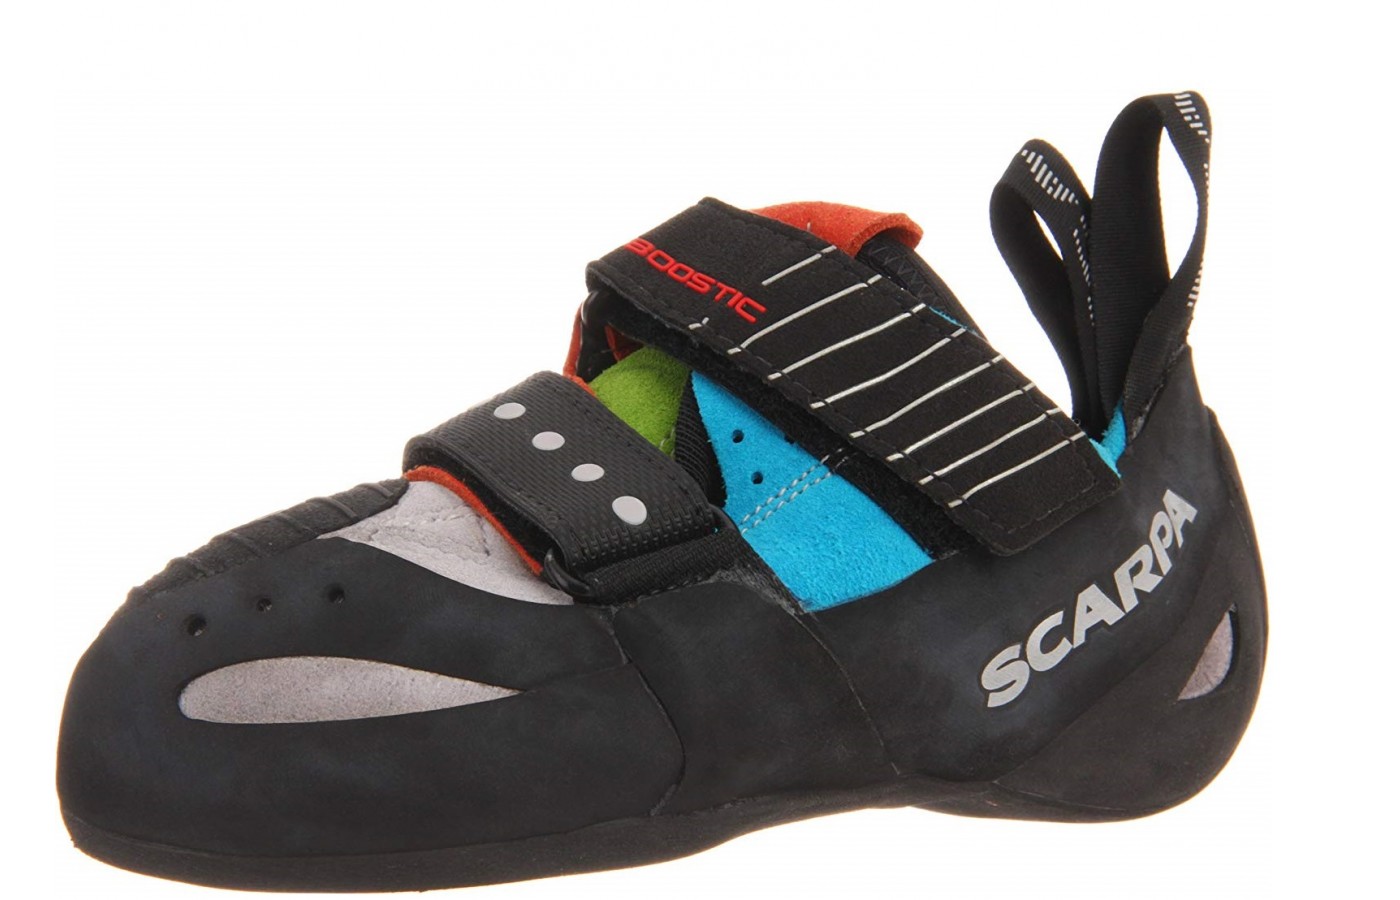 The closure system of the Scarpa Boostic is a hoop-and-loop system for easier tightening and loosening. 